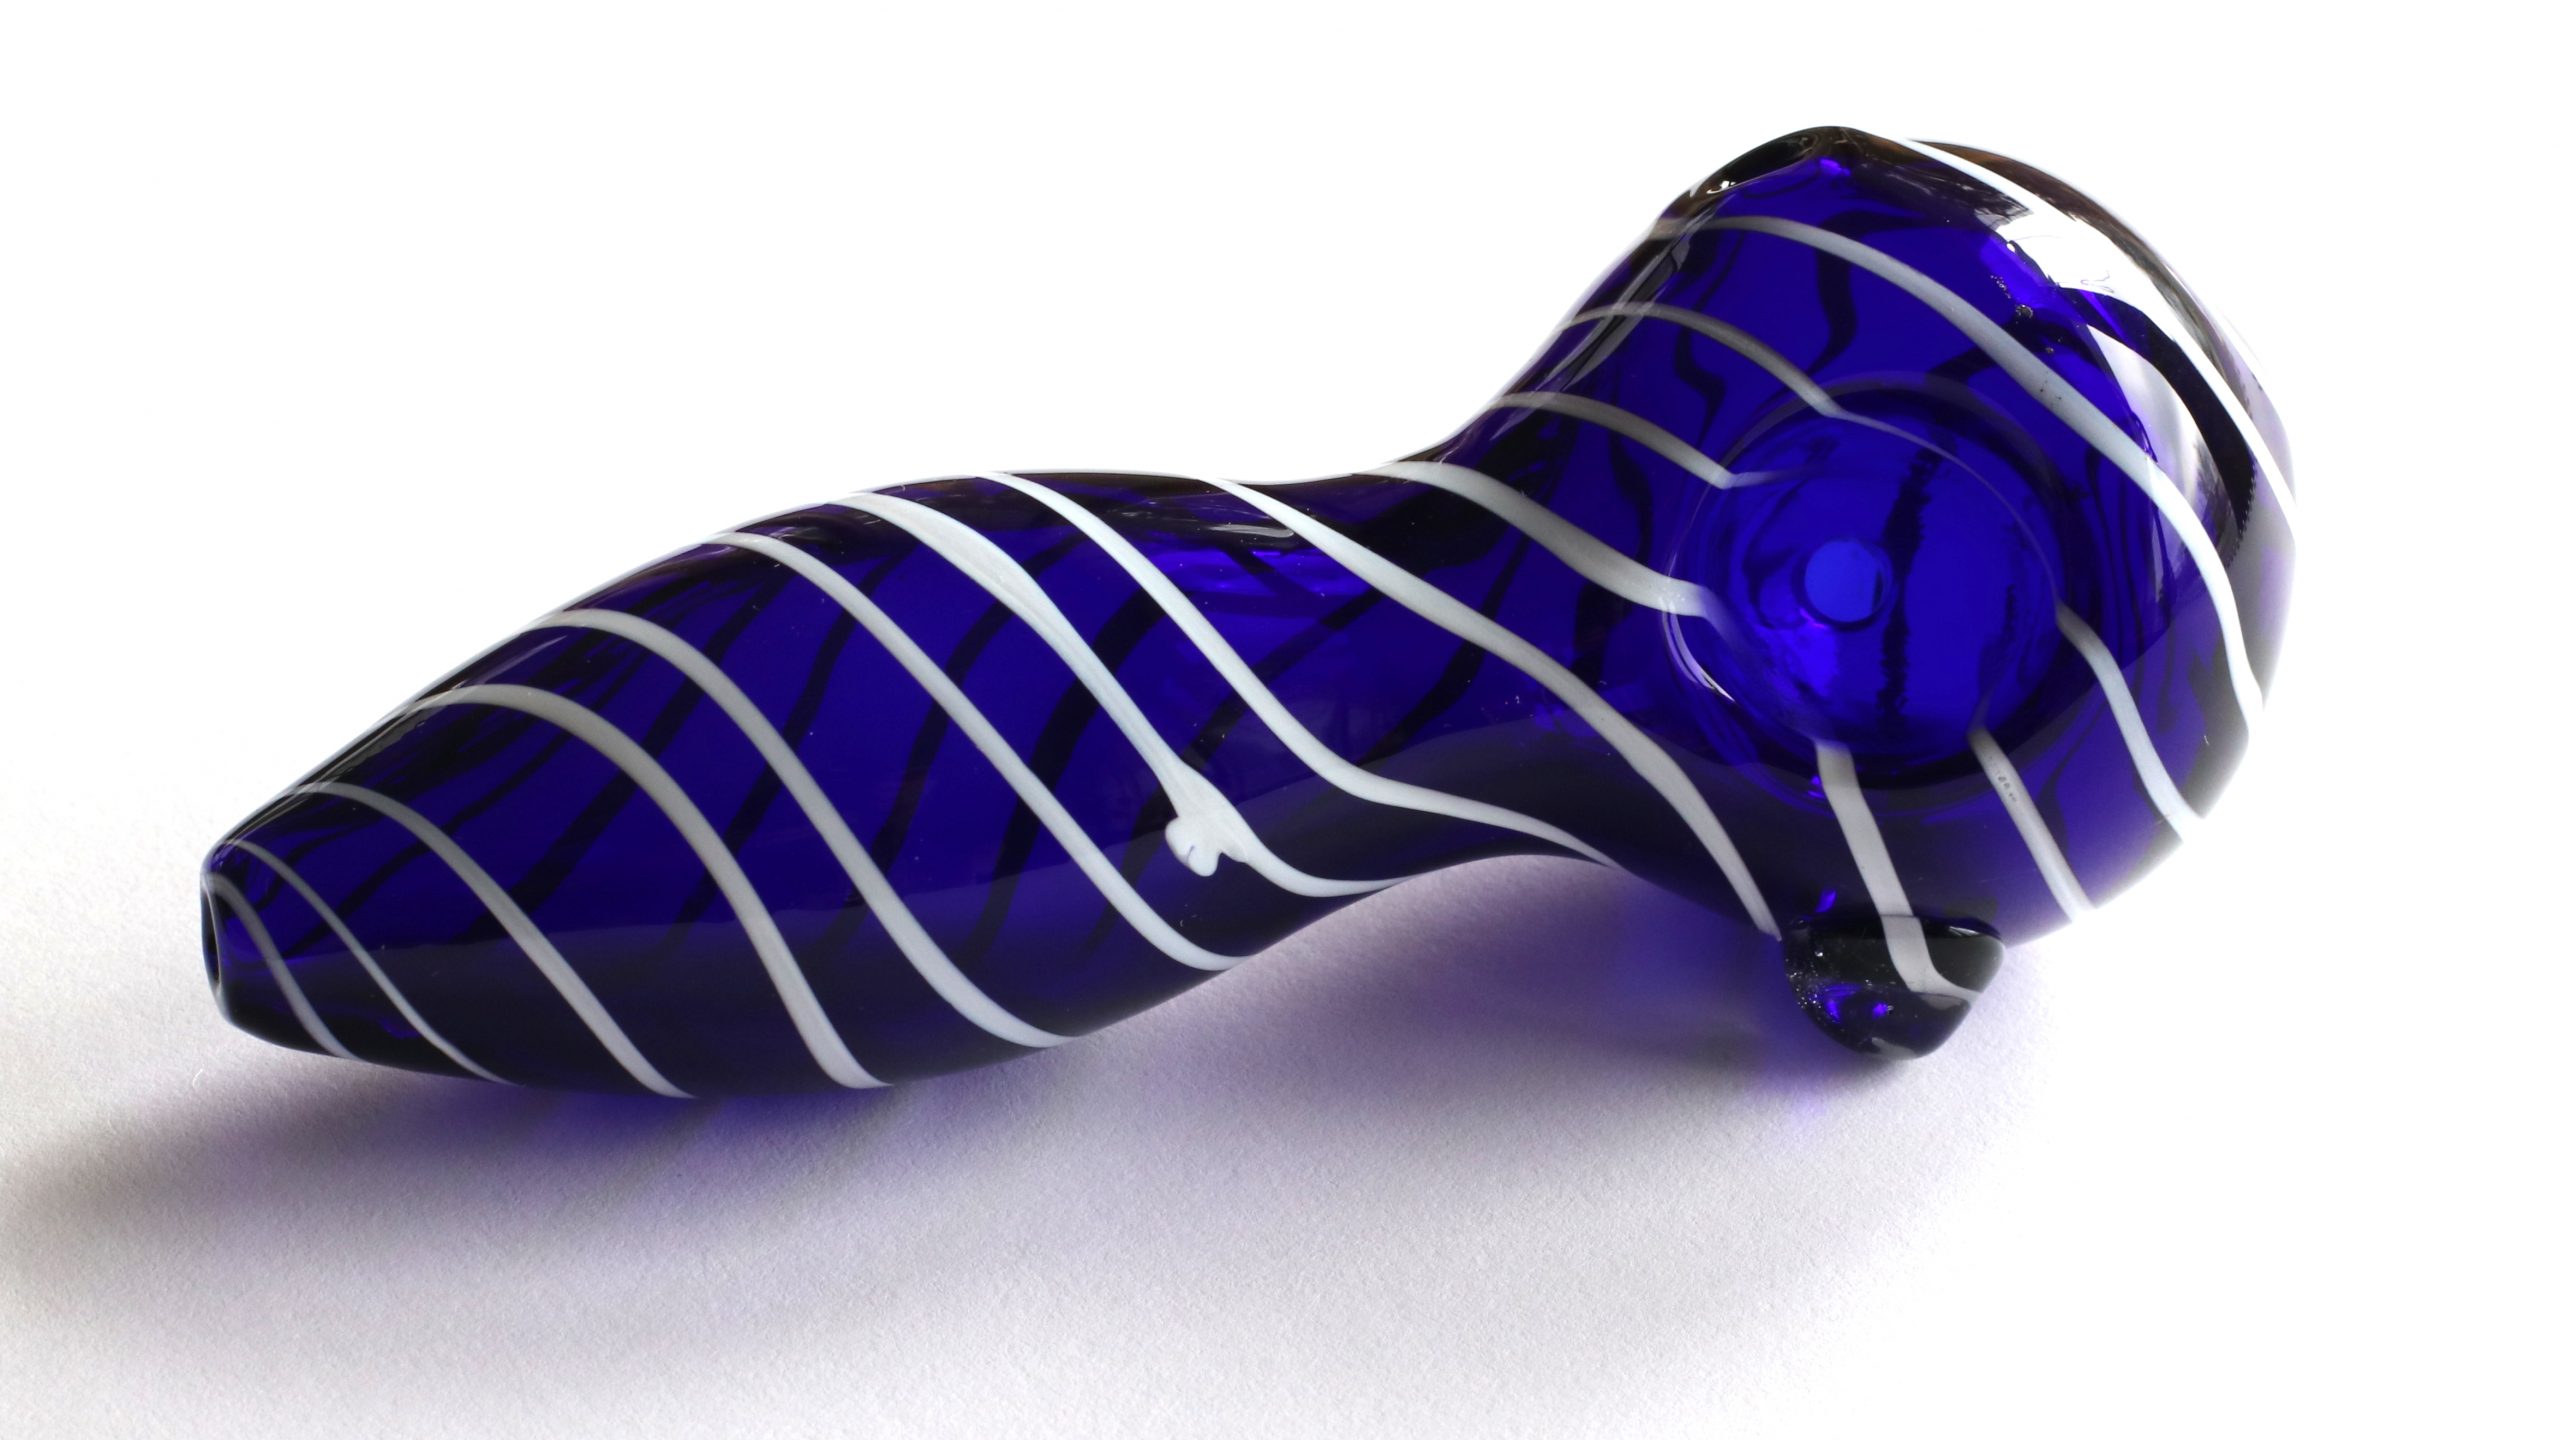 Handmade red blue solid glass smoking weed pipe